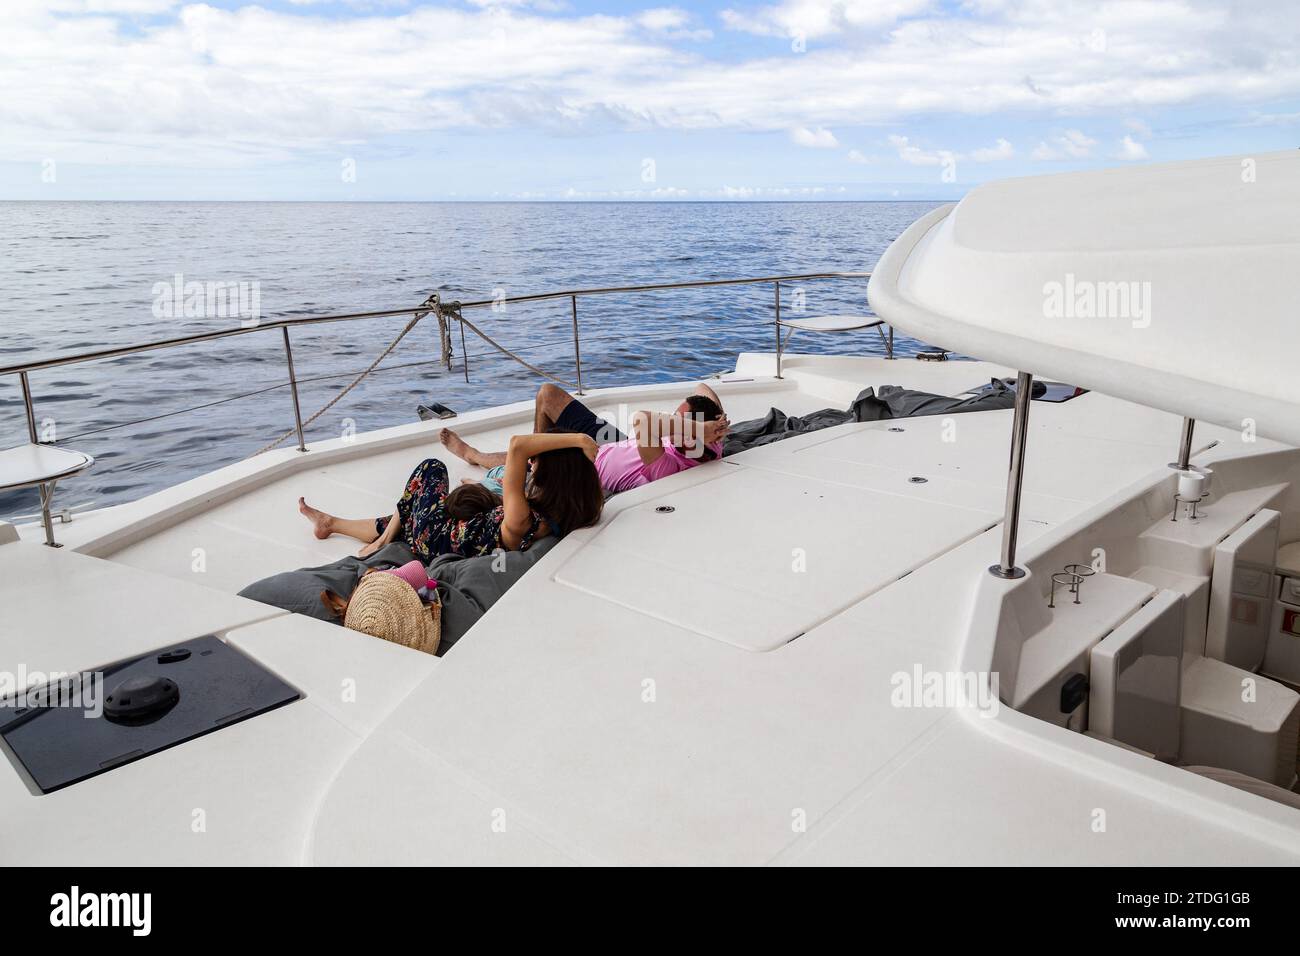 MADEIRA ISLAND, PORTUGAL - AUGUST 25, 2021: An unidentified couple enjoys a boat trip in the Atlantic Ocean off the coast of the island. Stock Photo